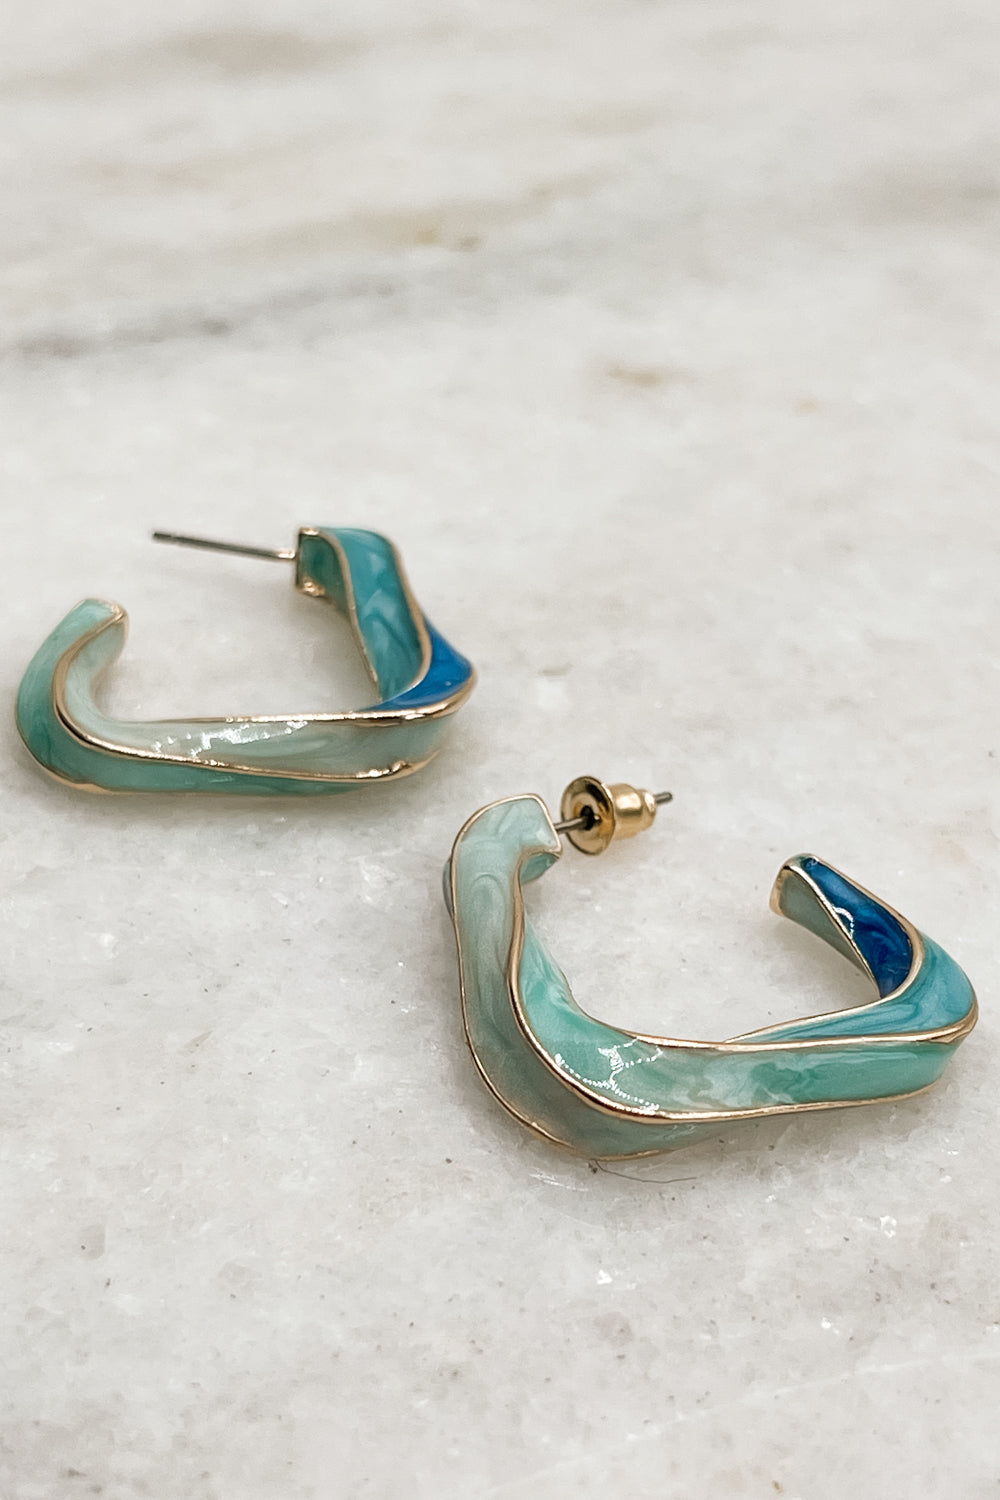 Alternate view of The Greyson Earrings are shown. They is gold and blue twisted hoops in a geometric shape.